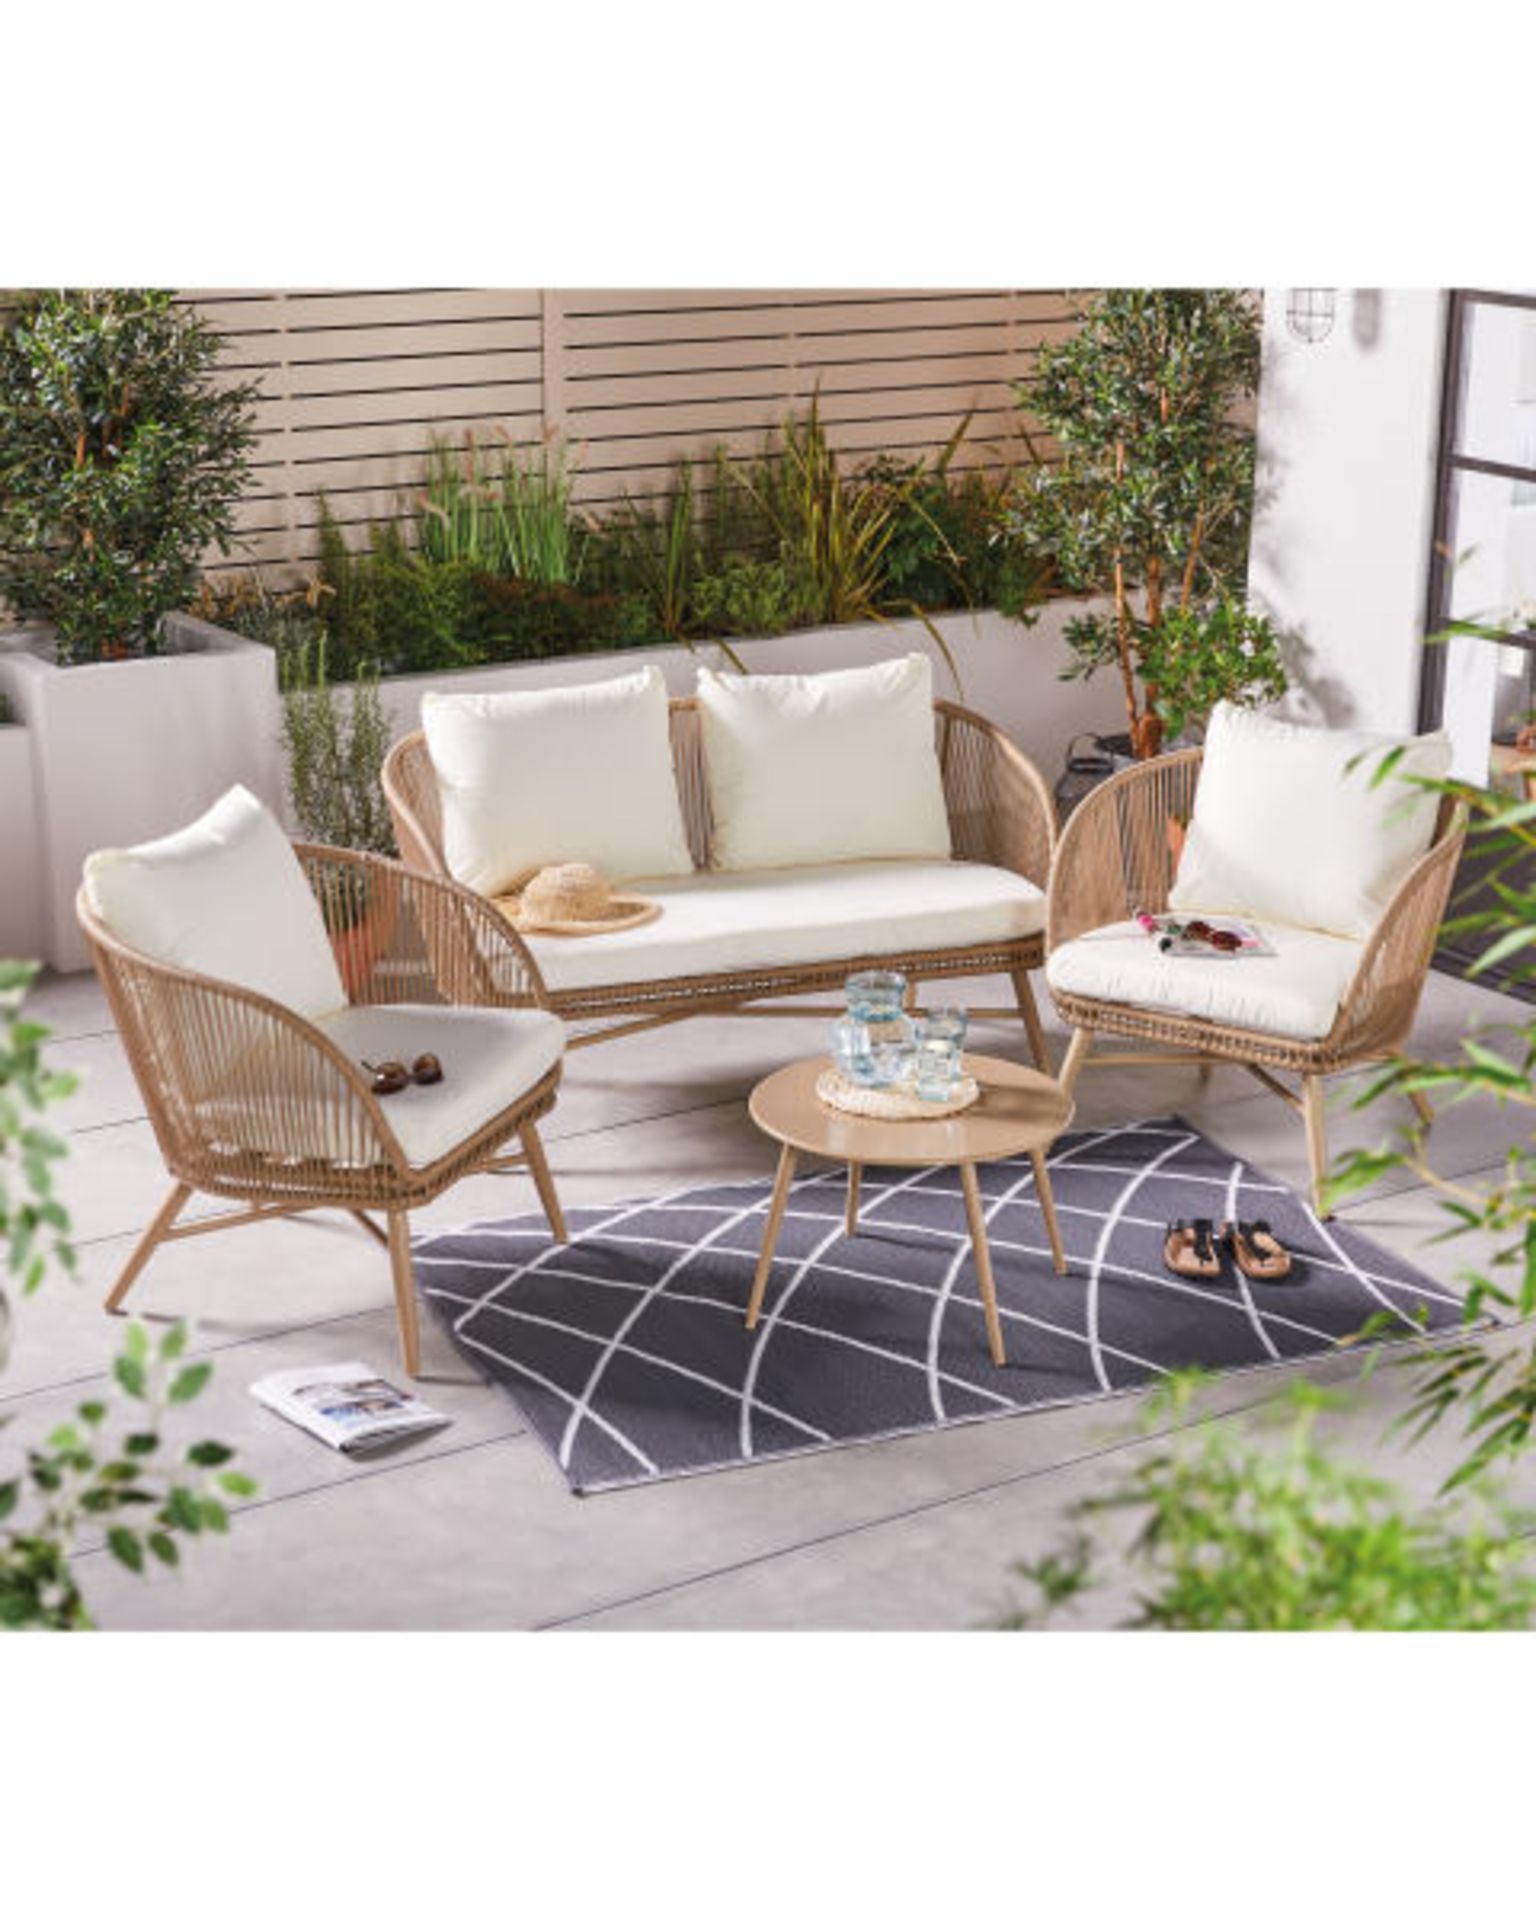 BULK LOT 4 x Luxury Rope Effect Furniture Set - Set of 4. Enjoy those lazy days in the garden with